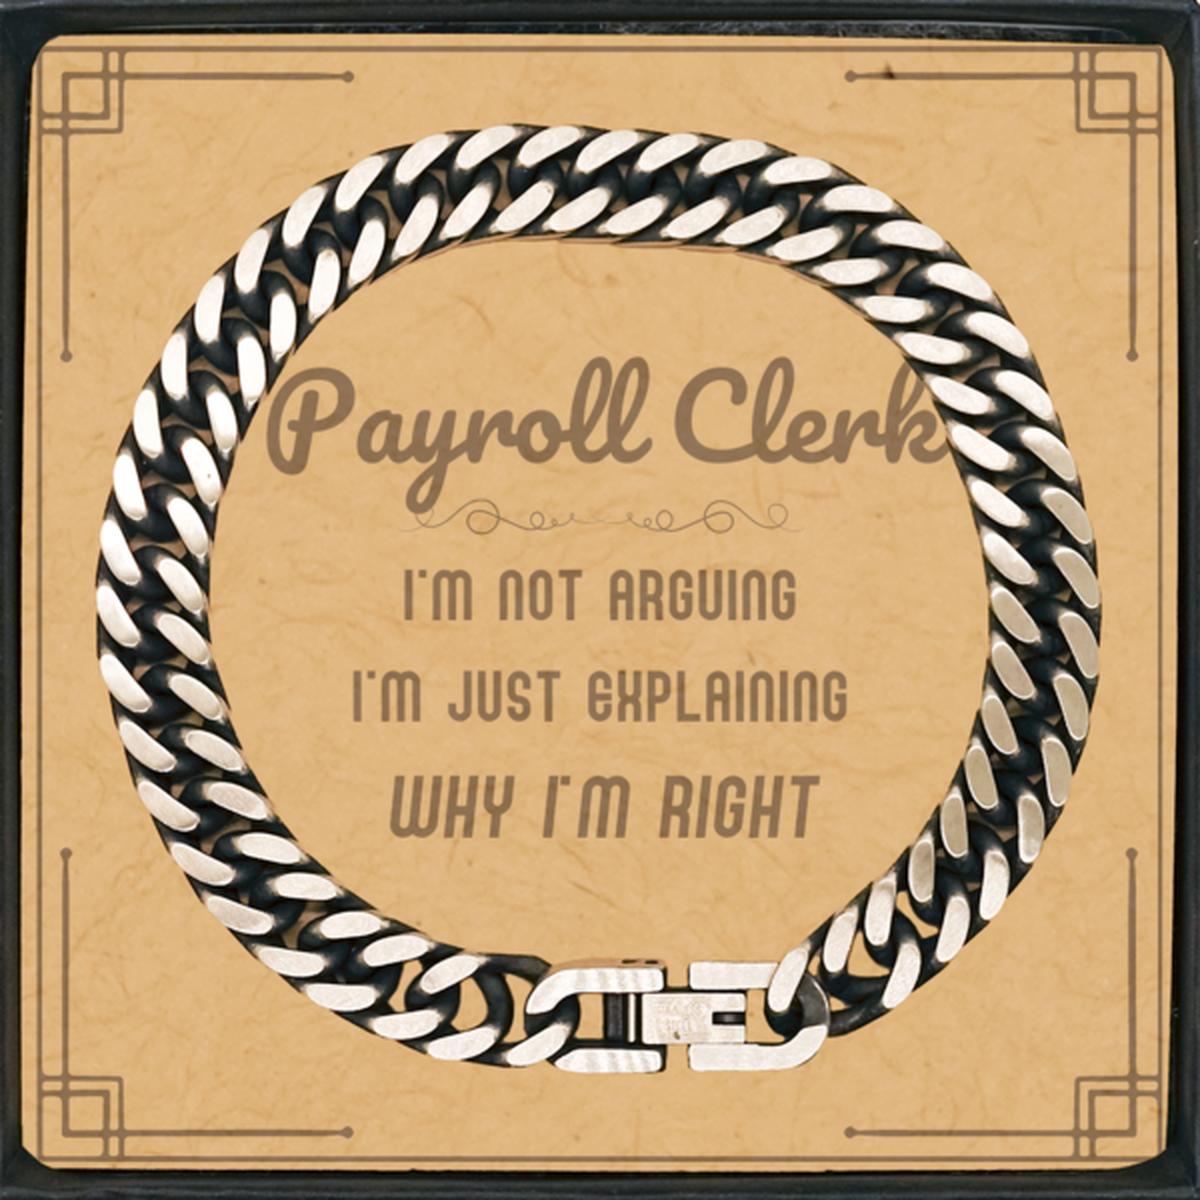 Payroll Clerk I'm not Arguing. I'm Just Explaining Why I'm RIGHT Cuban Link Chain Bracelet, Funny Saying Quote Payroll Clerk Gifts For Payroll Clerk Message Card Graduation Birthday Christmas Gifts for Men Women Coworker